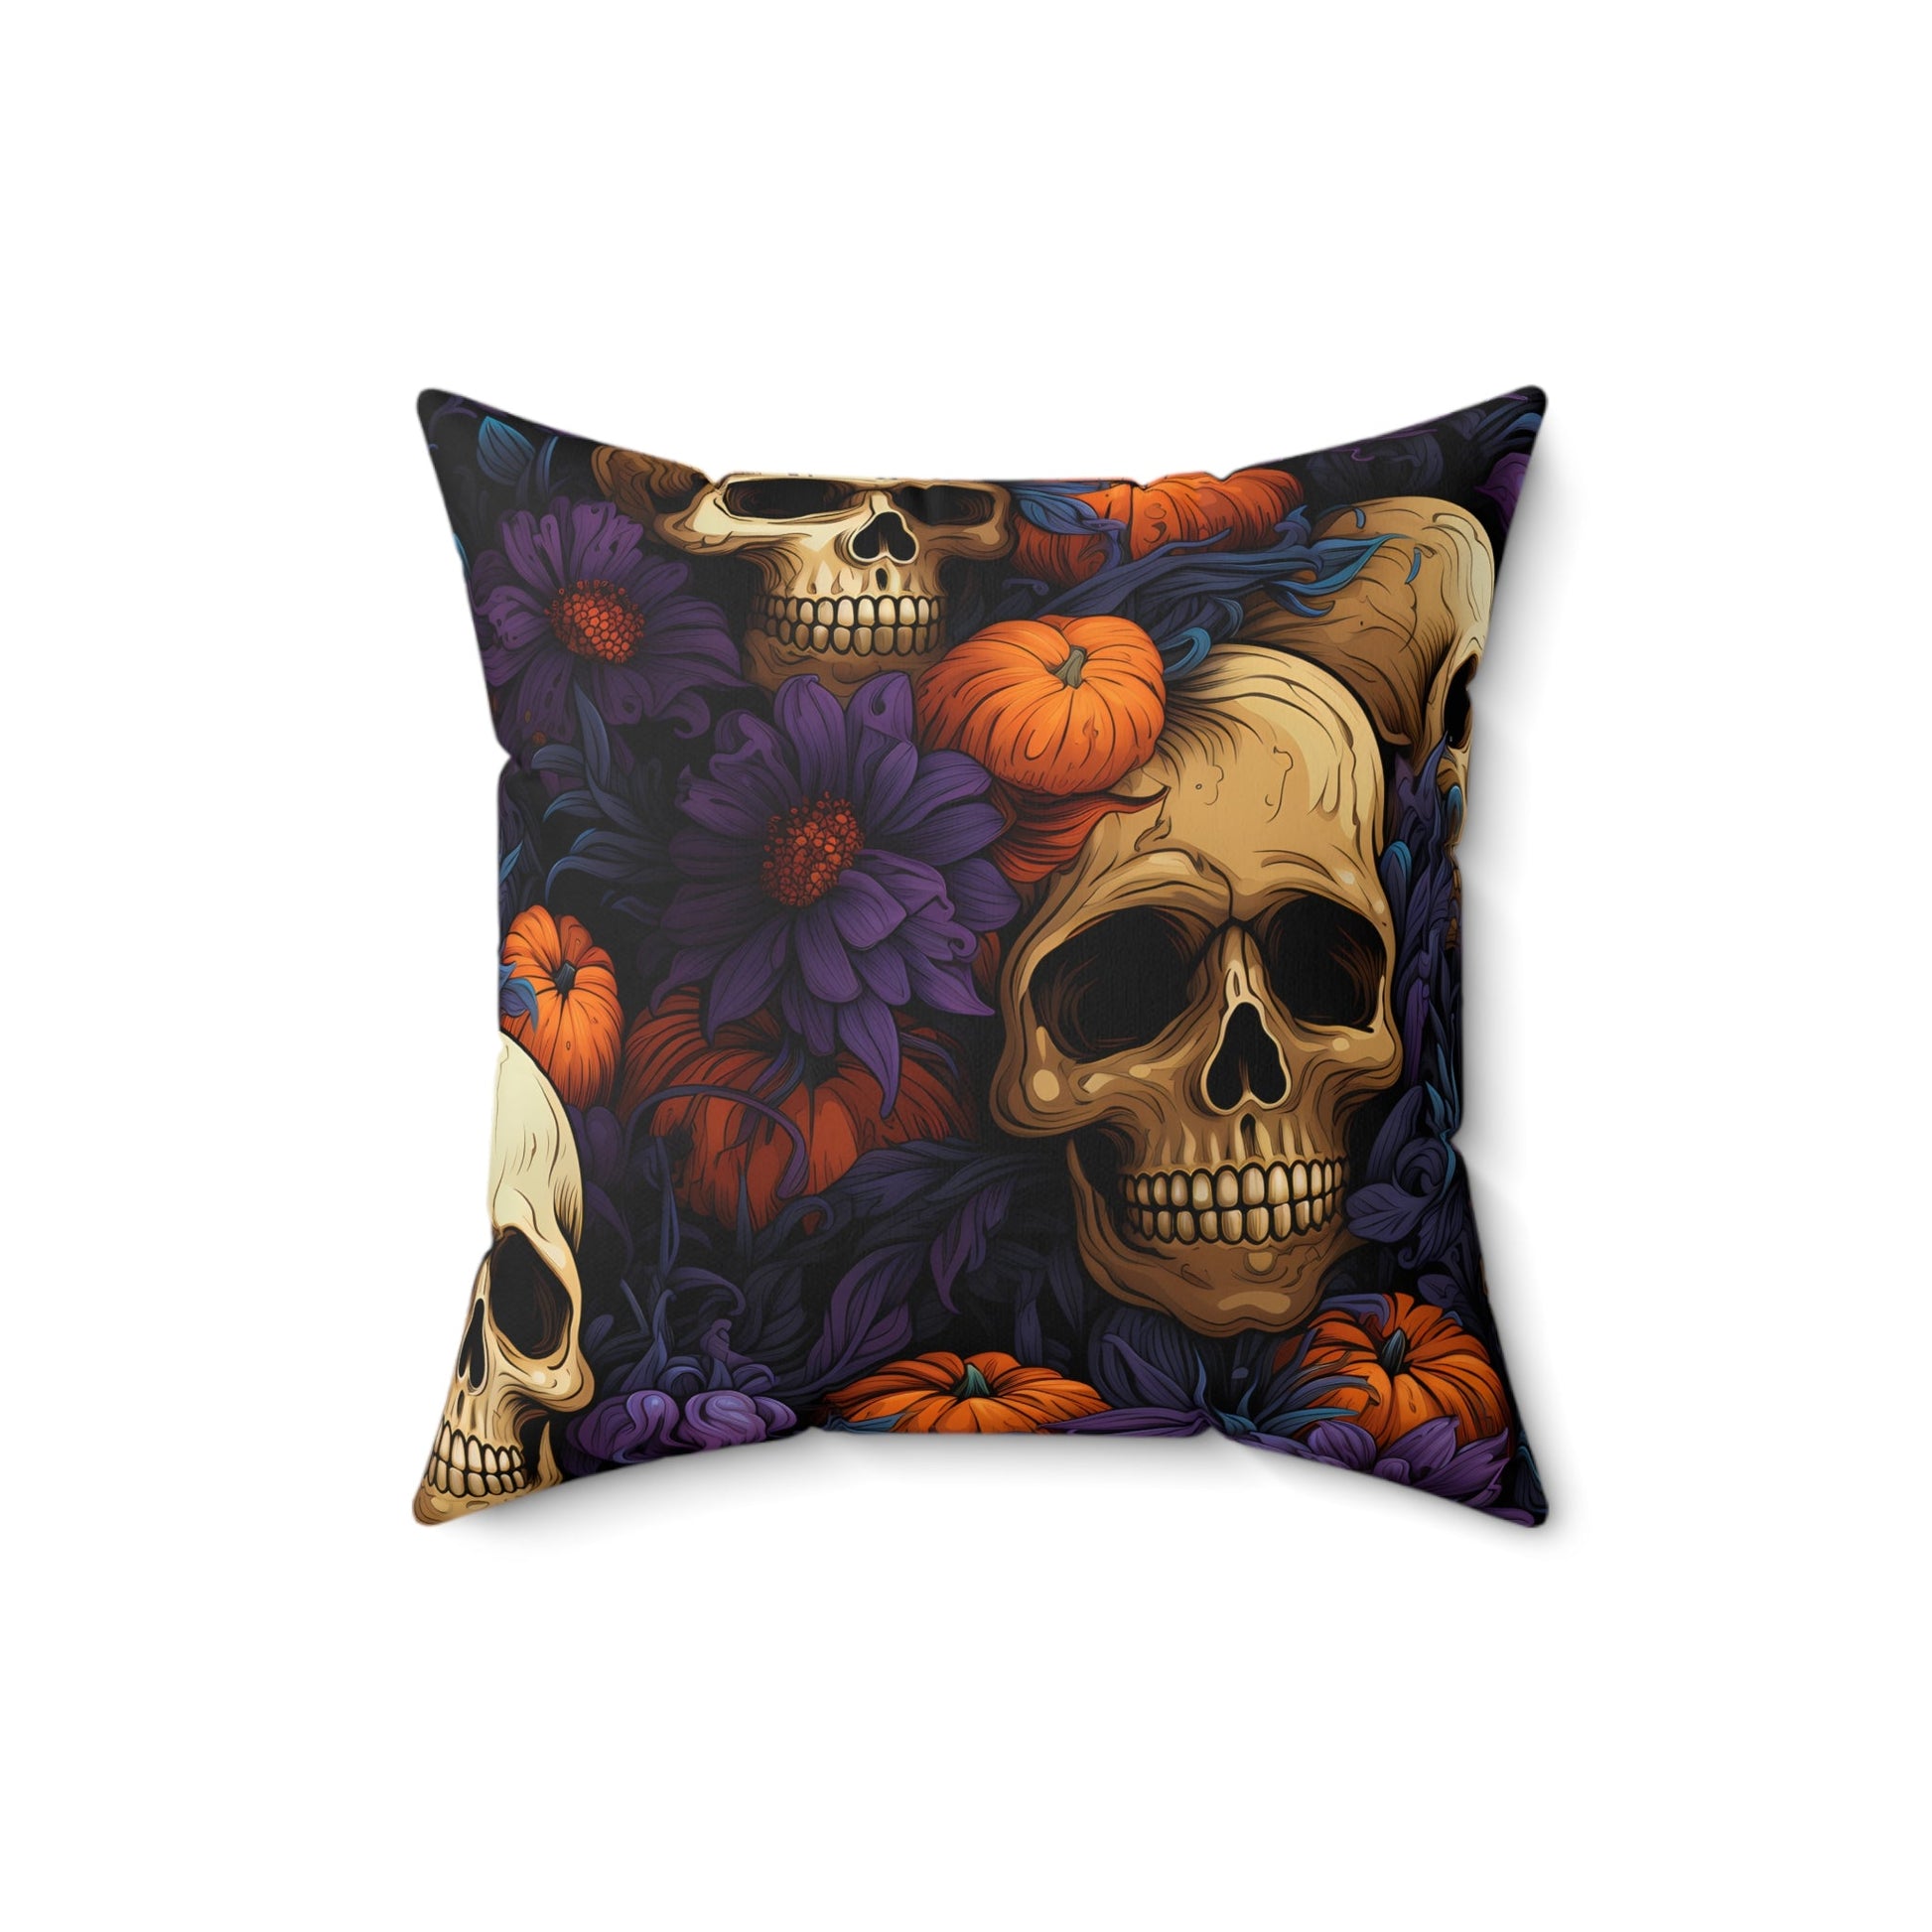 Floral Skulls and Pumpkins Square PillowHome DecorVTZdesigns16" × 16"All Over PrintAOPbaroque